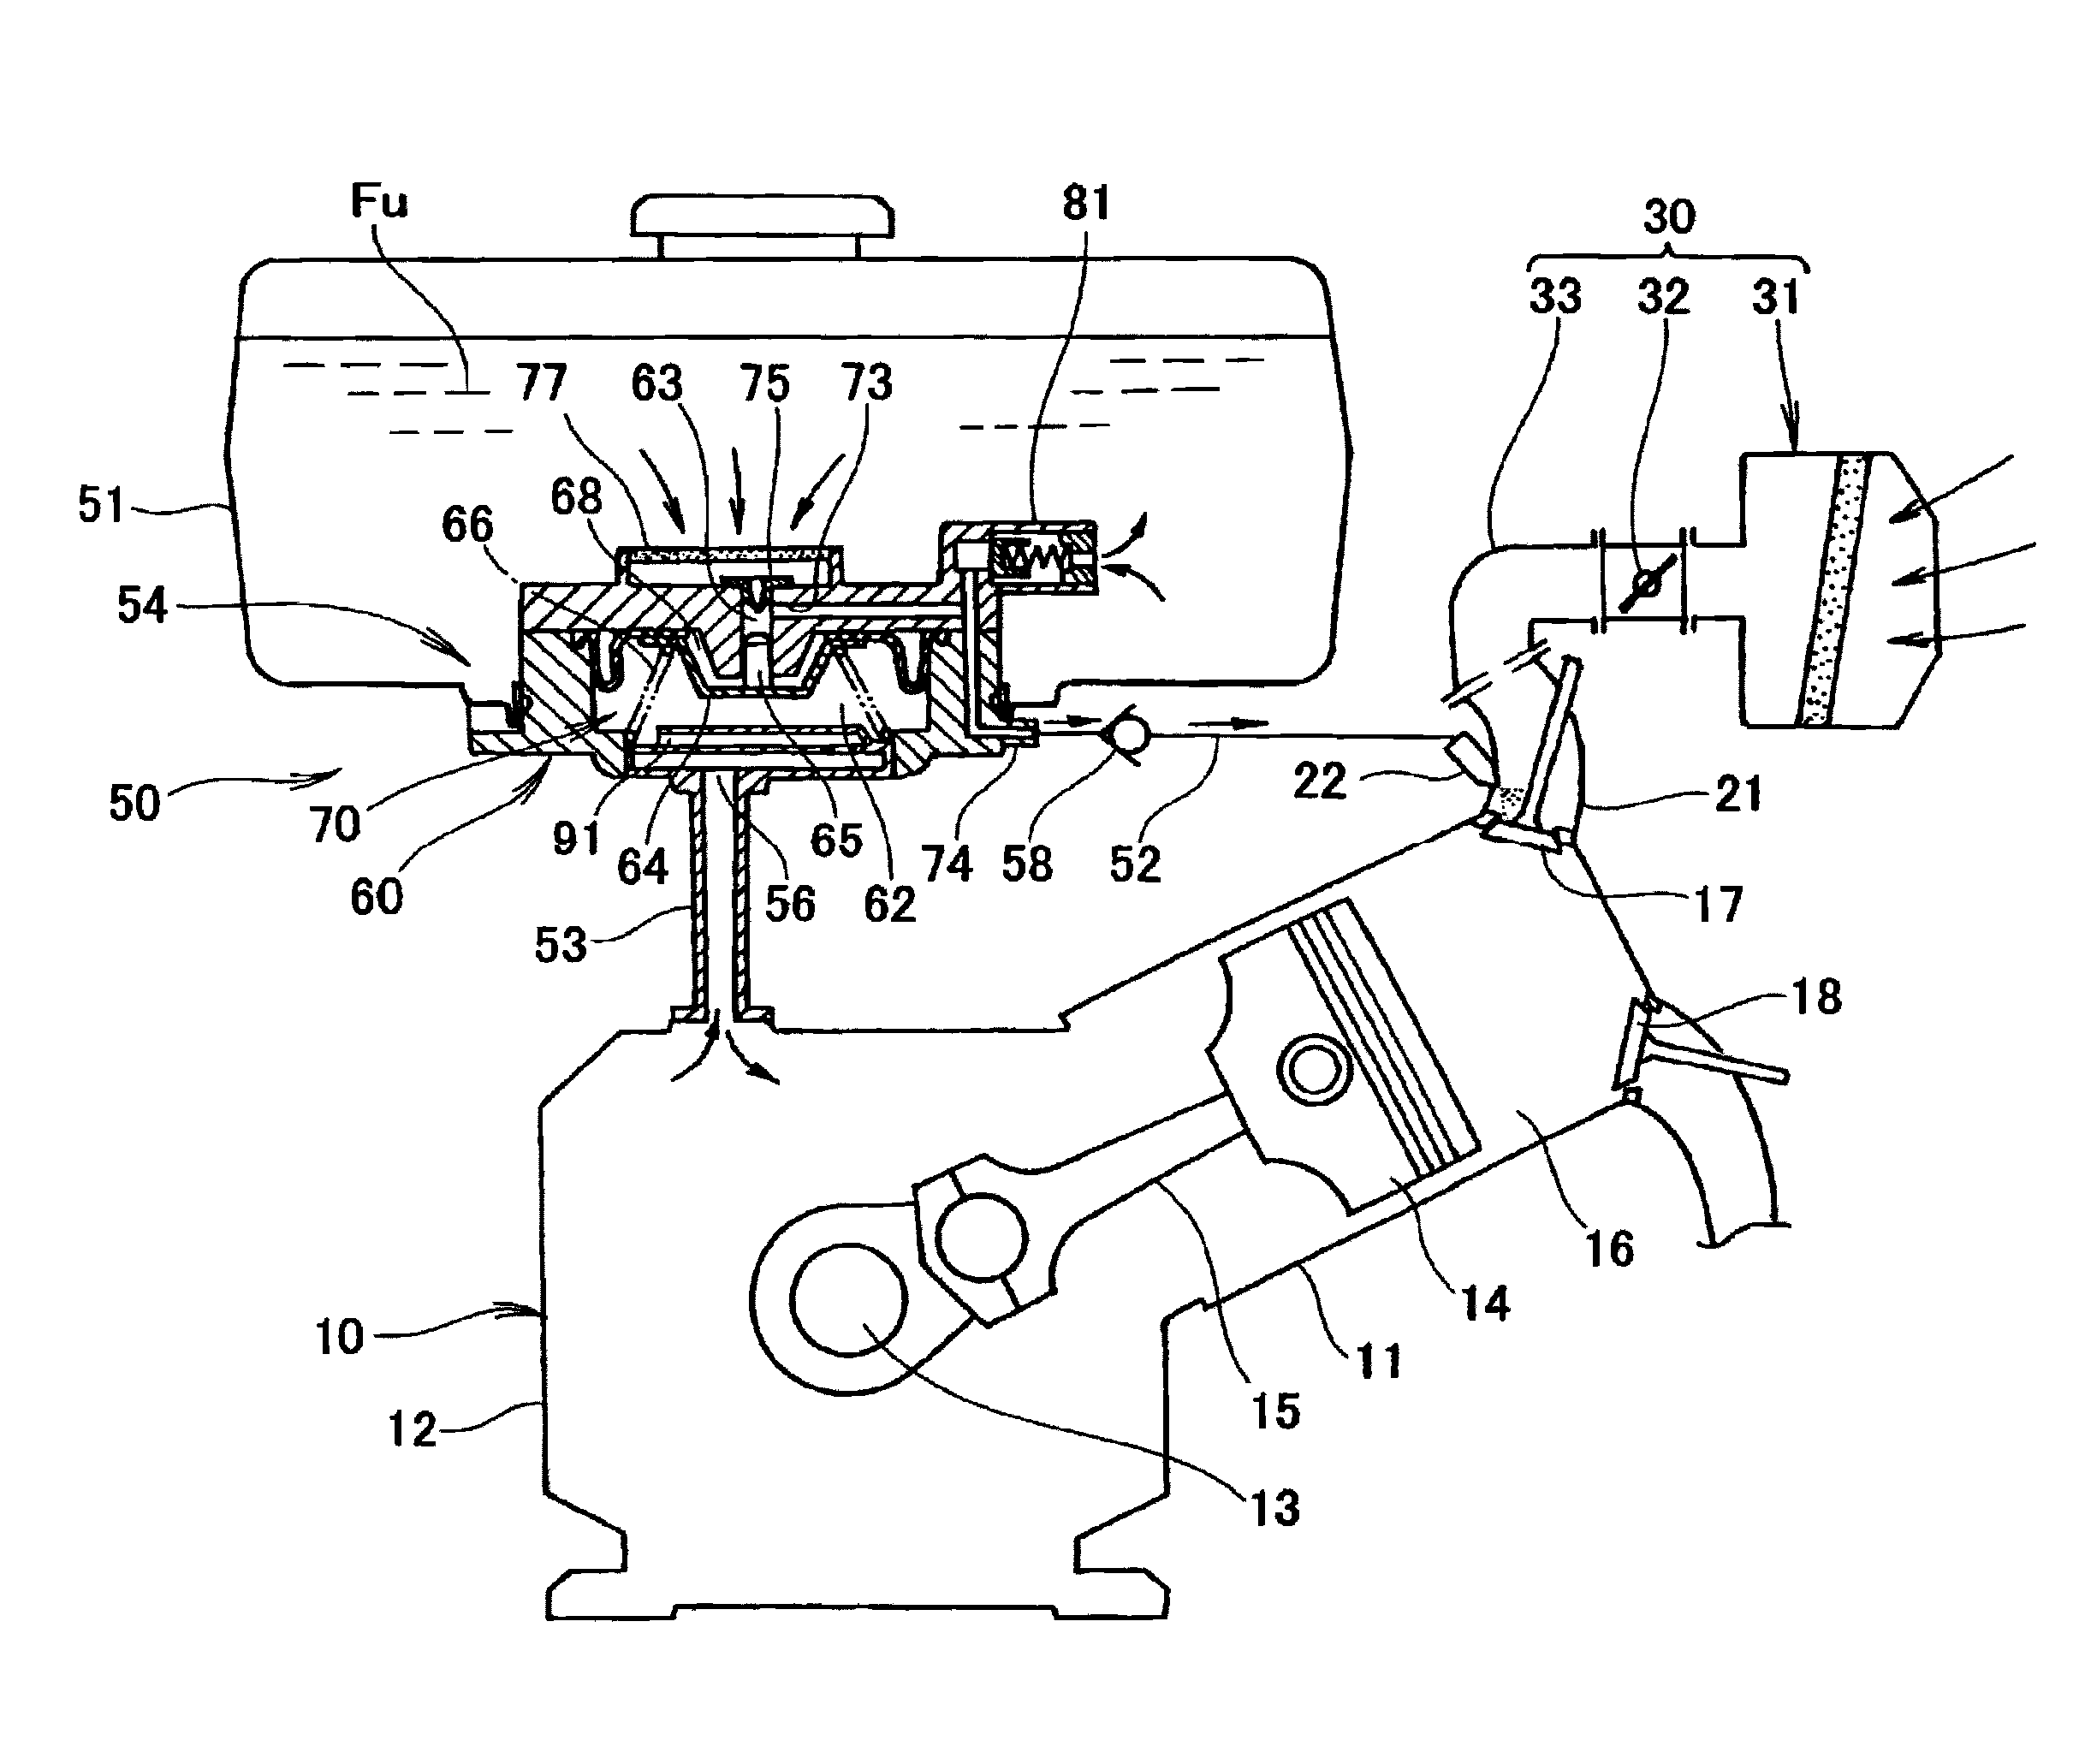 Fuel supply device for internal combustion engine